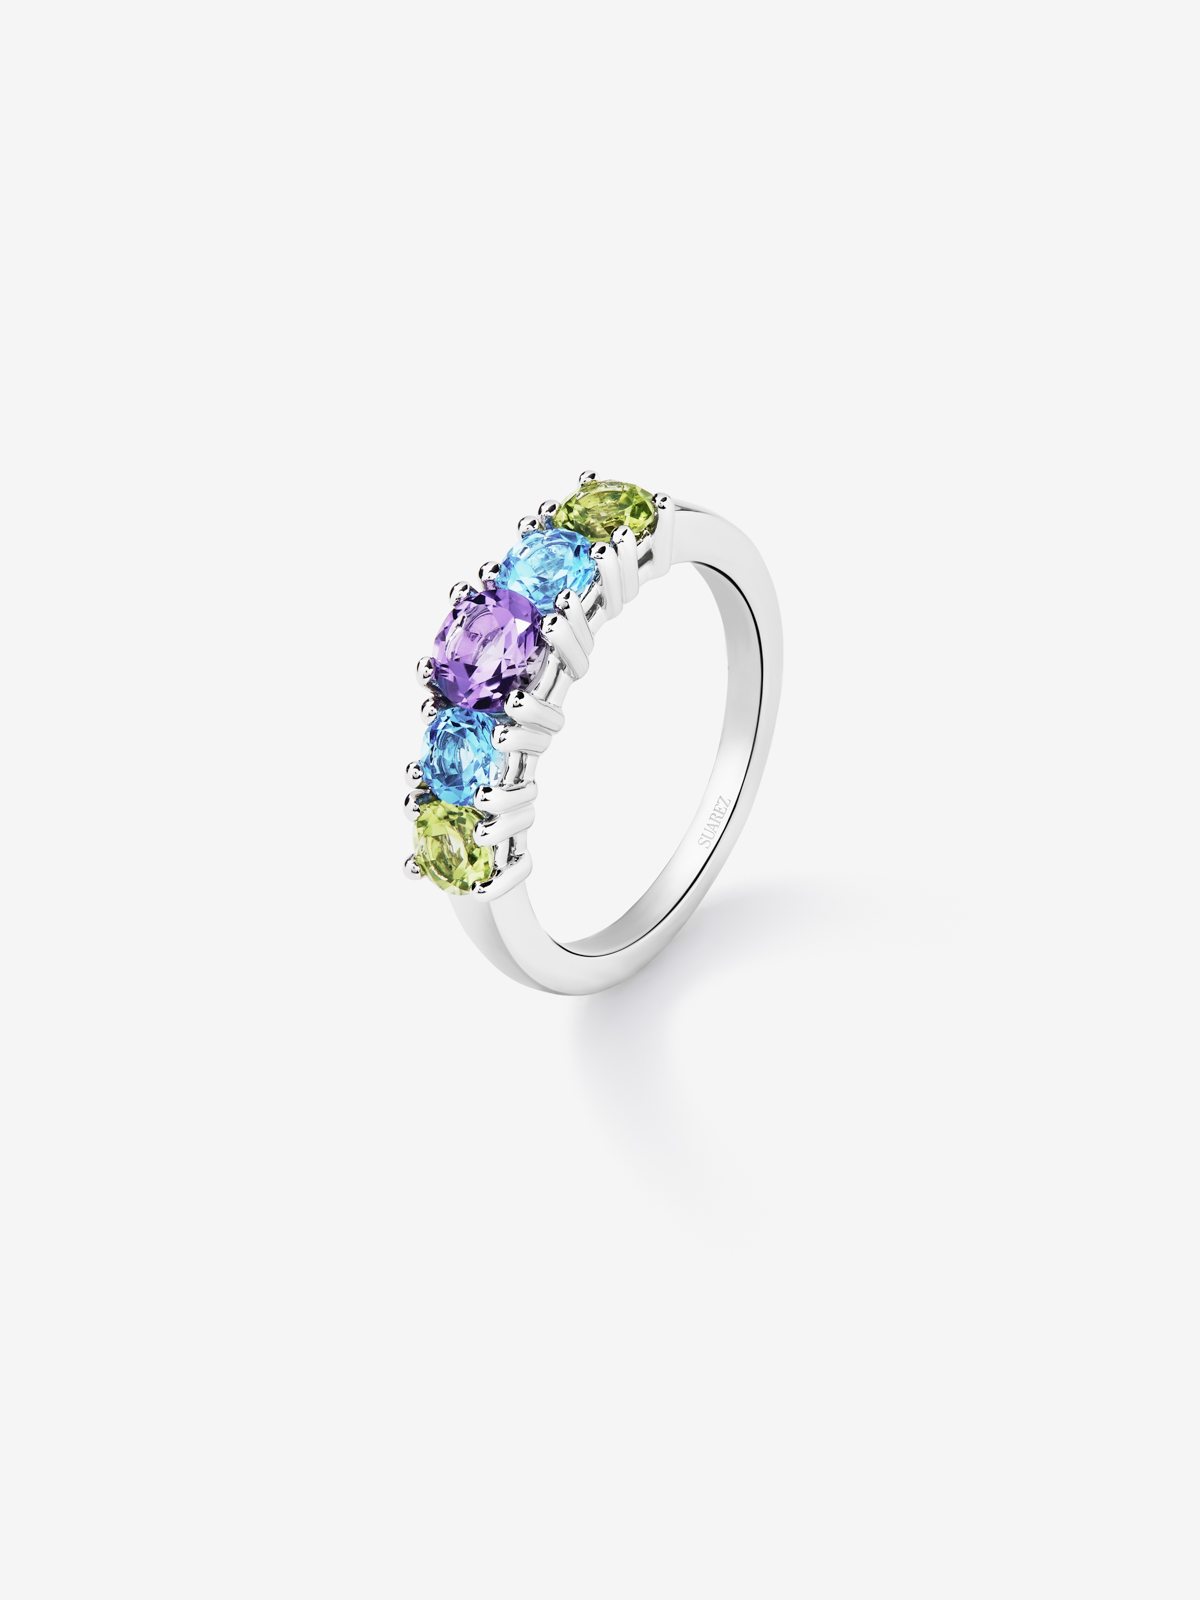 925 Silver Five-Stone Ring with Multicolored Gems